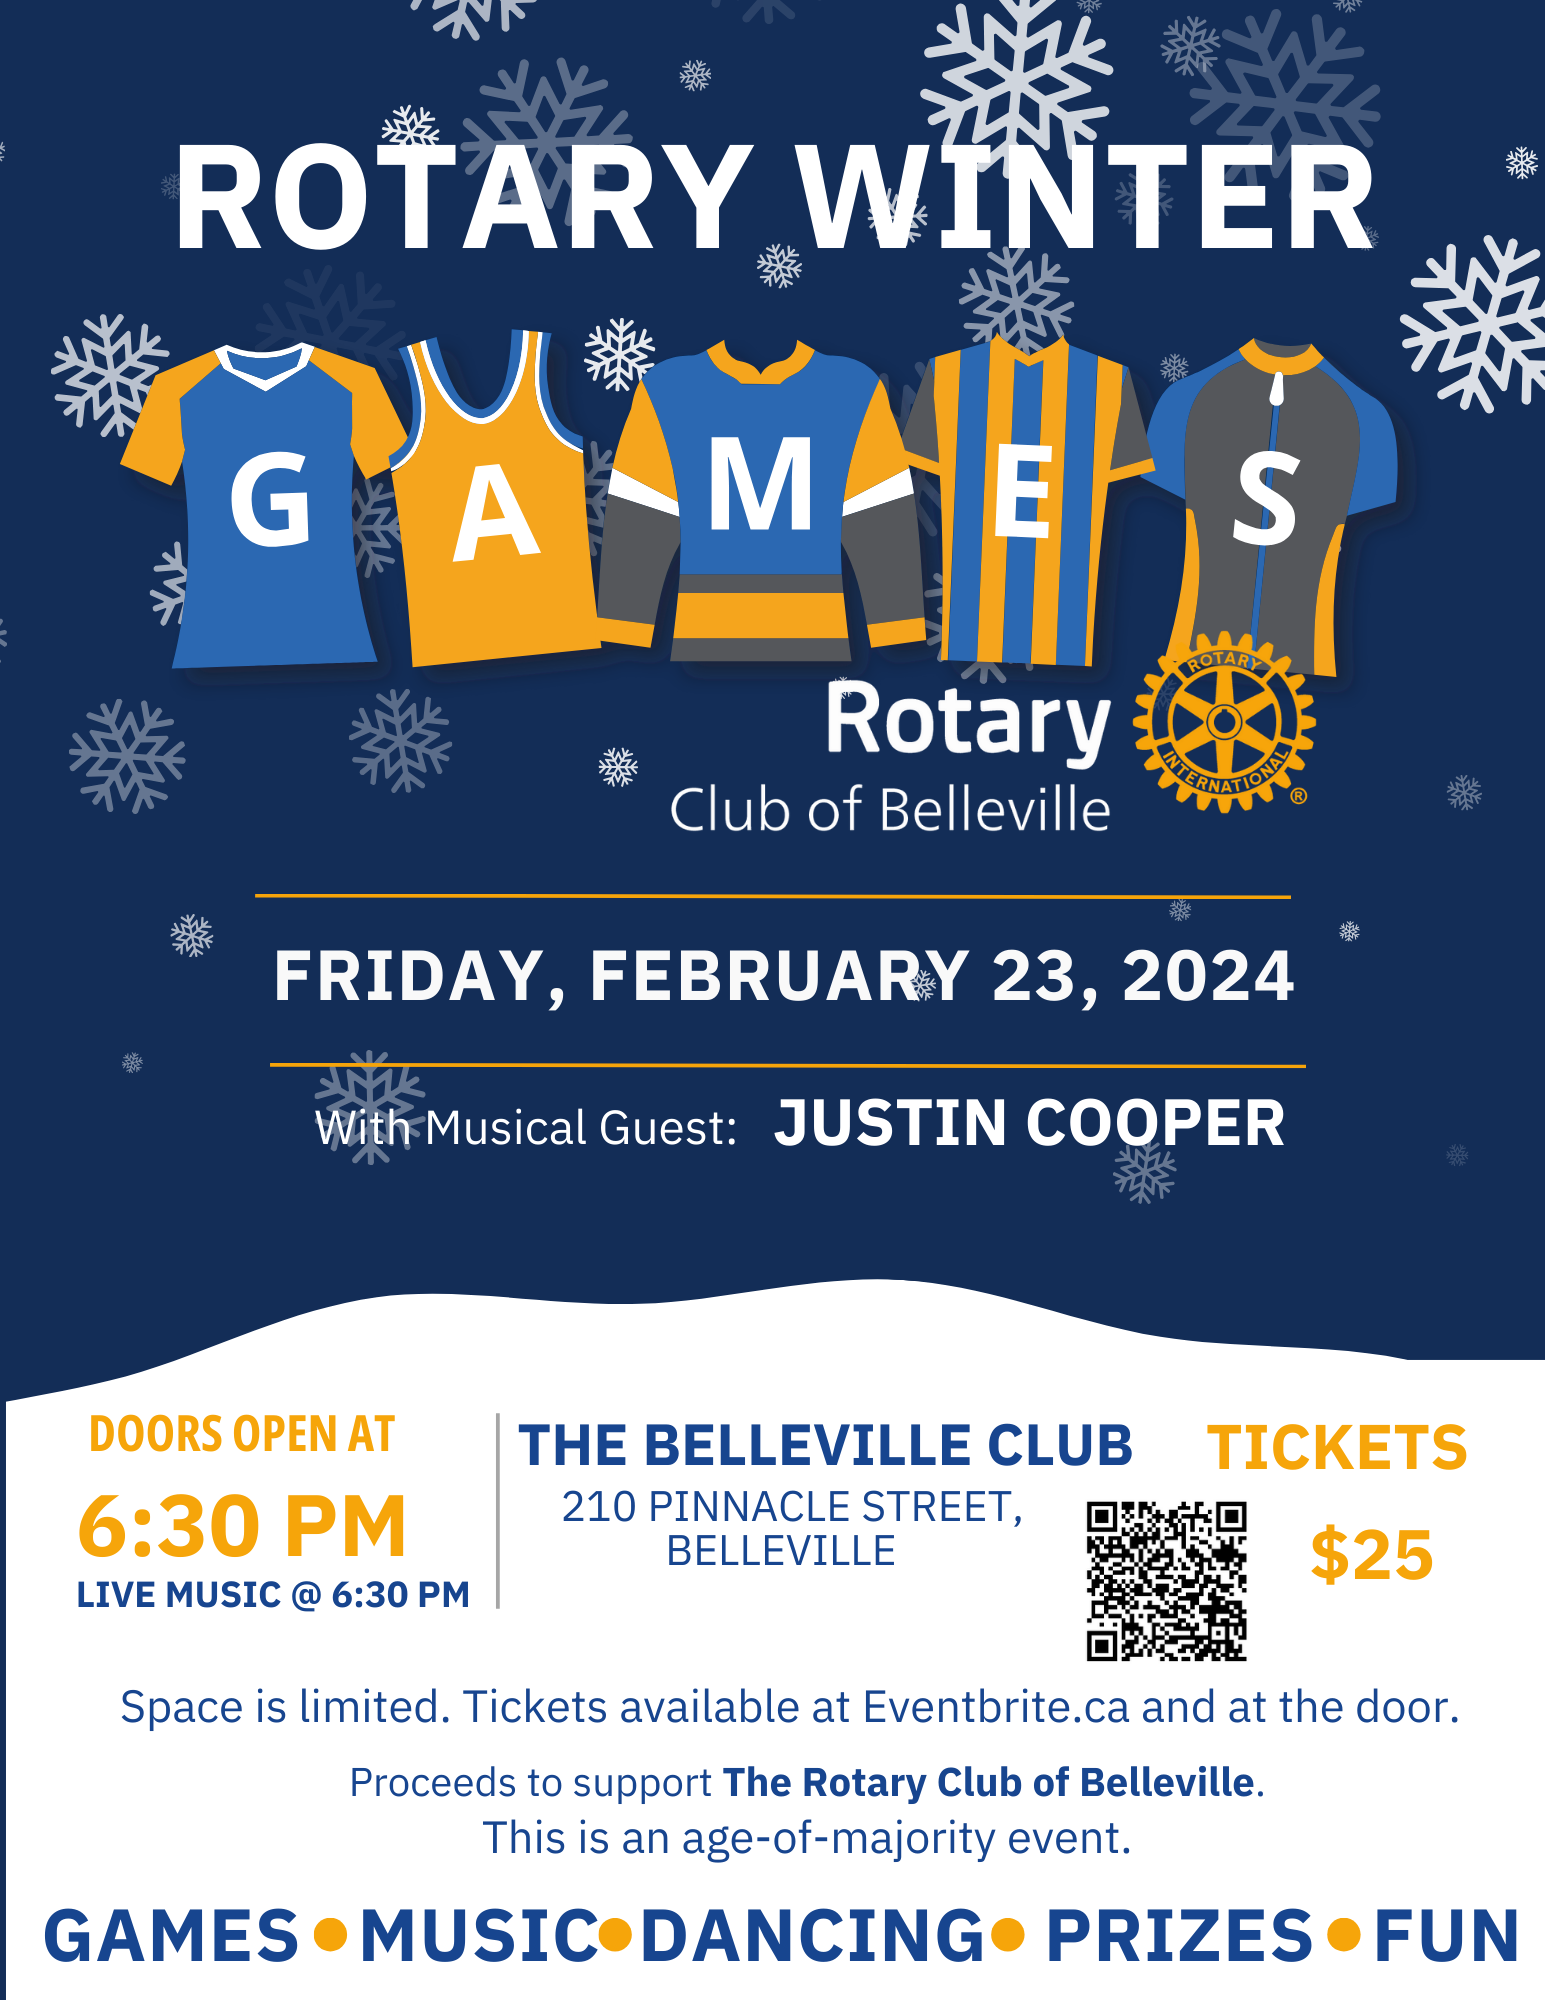 Event poster reads Rotary Winter Games with blue background and sports jerseys pictured.